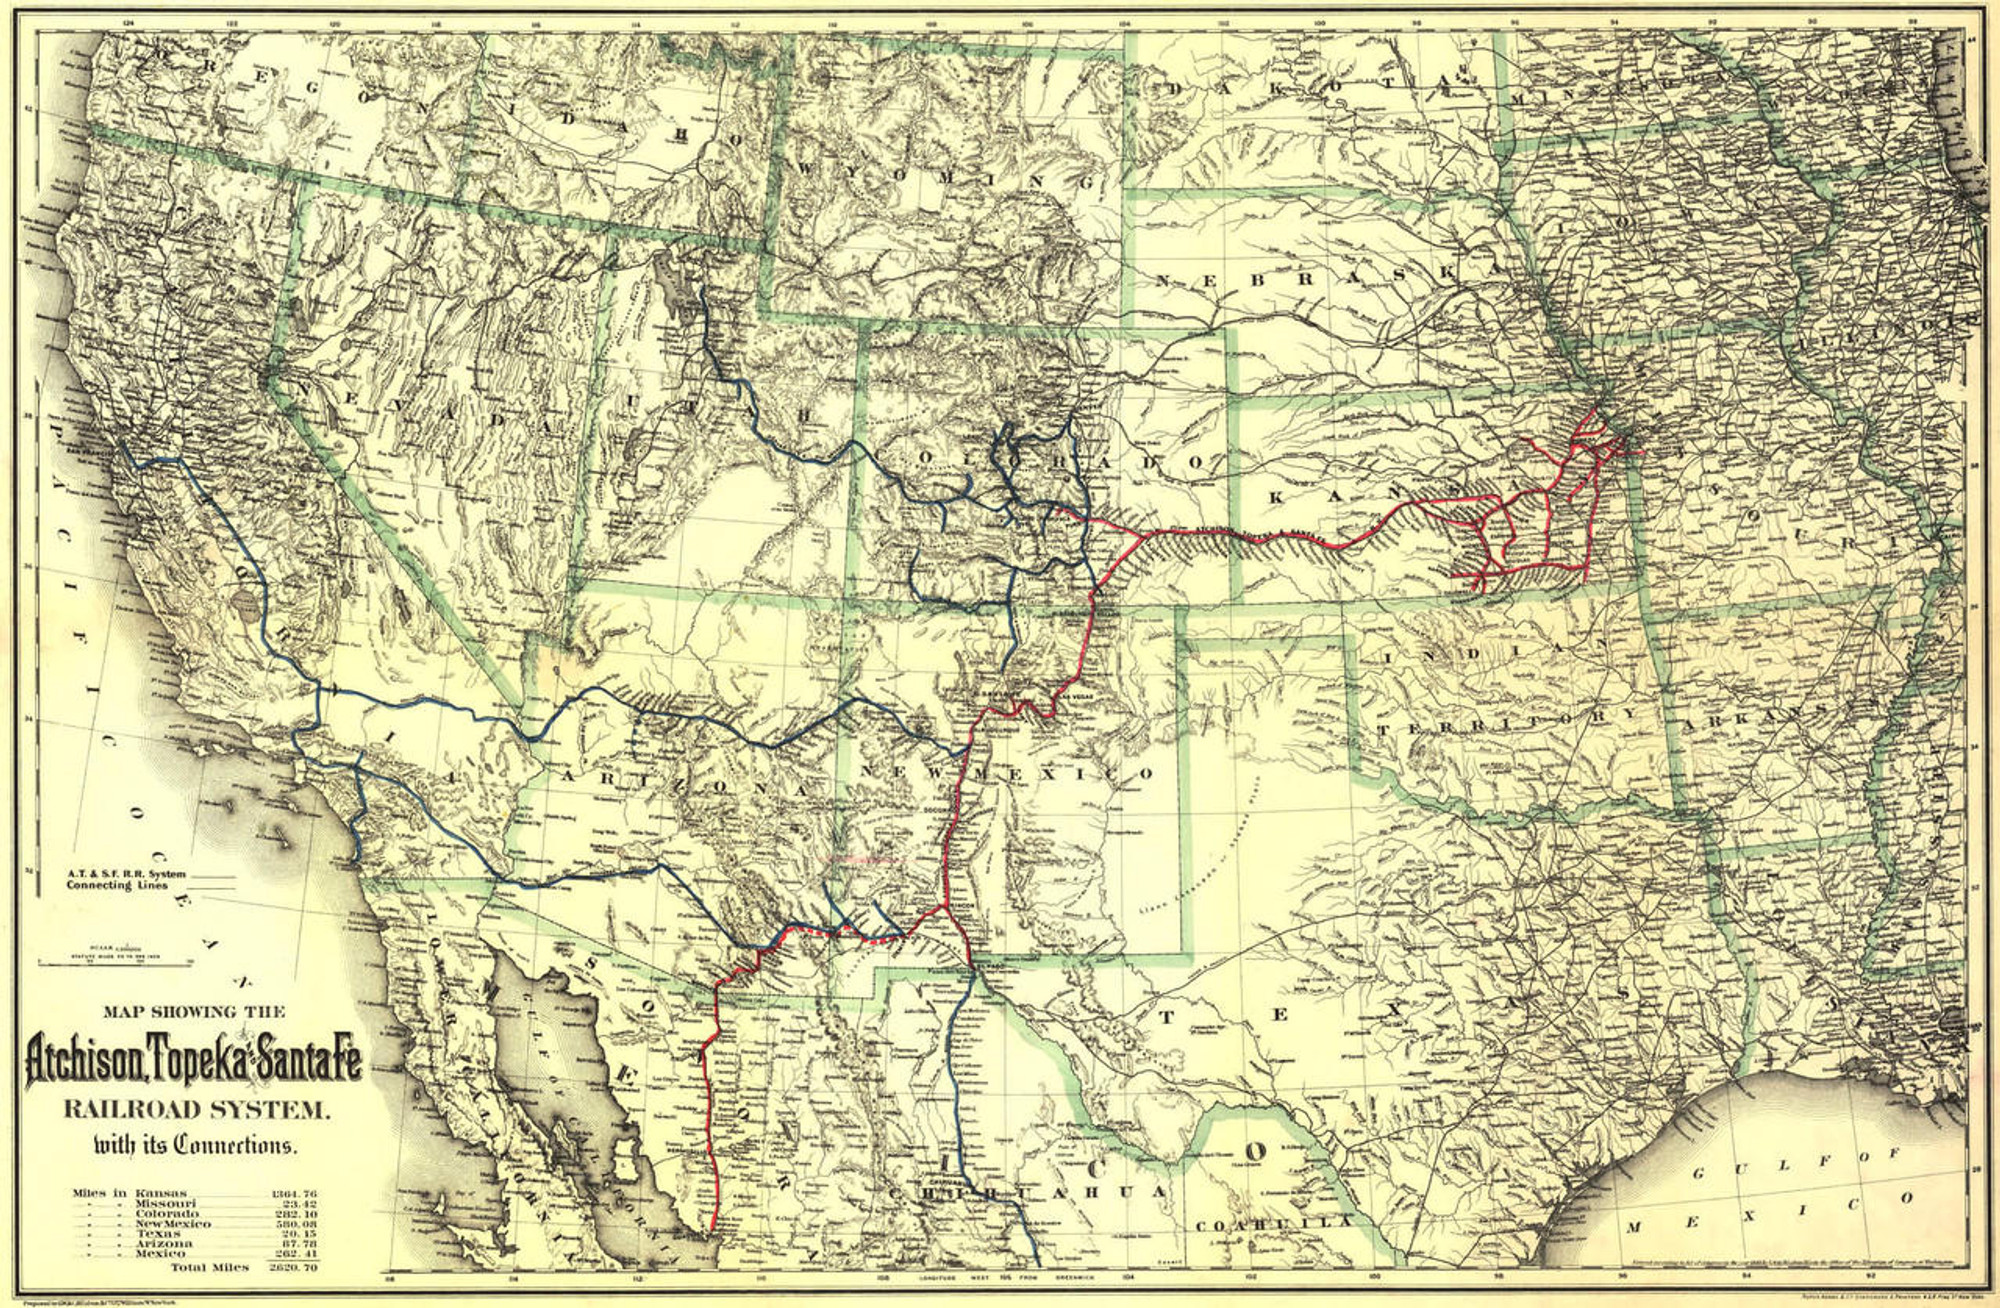 Historic Railroad Map of the Western United States - 1883, image 1, World Maps Online